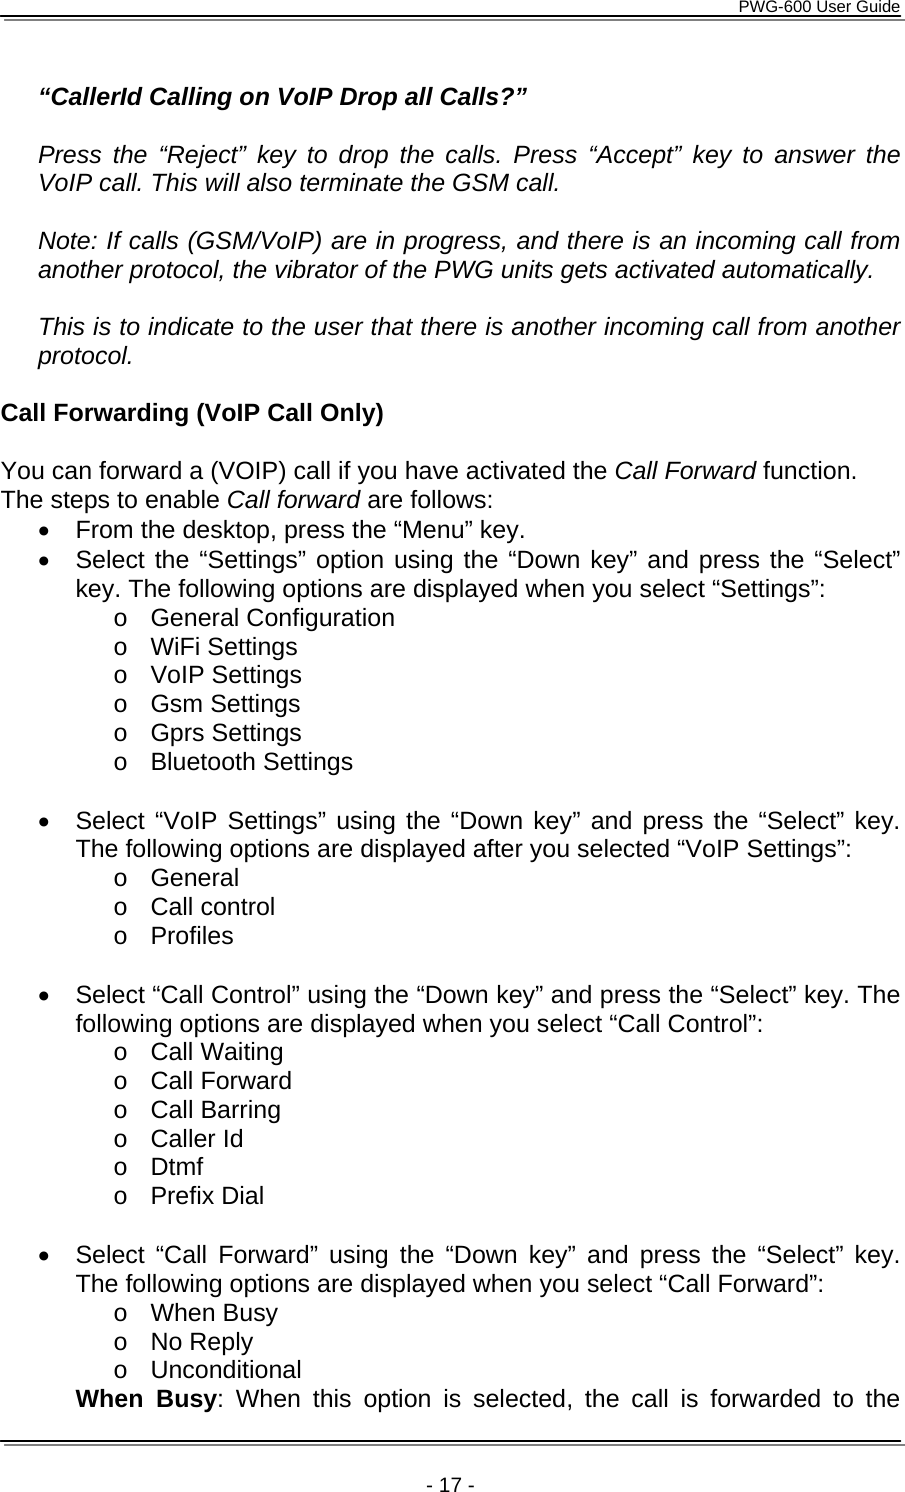      PWG-600 User Guide    - 17 -  “CallerId Calling on VoIP Drop all Calls?”   Press the “Reject” key to drop the calls. Press “Accept” key to answer the VoIP call. This will also terminate the GSM call.  Note: If calls (GSM/VoIP) are in progress, and there is an incoming call from another protocol, the vibrator of the PWG units gets activated automatically.  This is to indicate to the user that there is another incoming call from another protocol.  Call Forwarding (VoIP Call Only)  You can forward a (VOIP) call if you have activated the Call Forward function. The steps to enable Call forward are follows: •  From the desktop, press the “Menu” key. •  Select the “Settings” option using the “Down key” and press the “Select” key. The following options are displayed when you select “Settings”: o General Configuration o WiFi Settings o VoIP Settings o Gsm Settings o Gprs Settings o Bluetooth Settings  •  Select “VoIP Settings” using the “Down key” and press the “Select” key. The following options are displayed after you selected “VoIP Settings”: o General o Call control o Profiles  •  Select “Call Control” using the “Down key” and press the “Select” key. The following options are displayed when you select “Call Control”:  o Call Waiting o Call Forward o Call Barring o Caller Id o Dtmf o Prefix Dial  •  Select “Call Forward” using the “Down key” and press the “Select” key. The following options are displayed when you select “Call Forward”: o When Busy o No Reply o Unconditional  When Busy: When this option is selected, the call is forwarded to the 